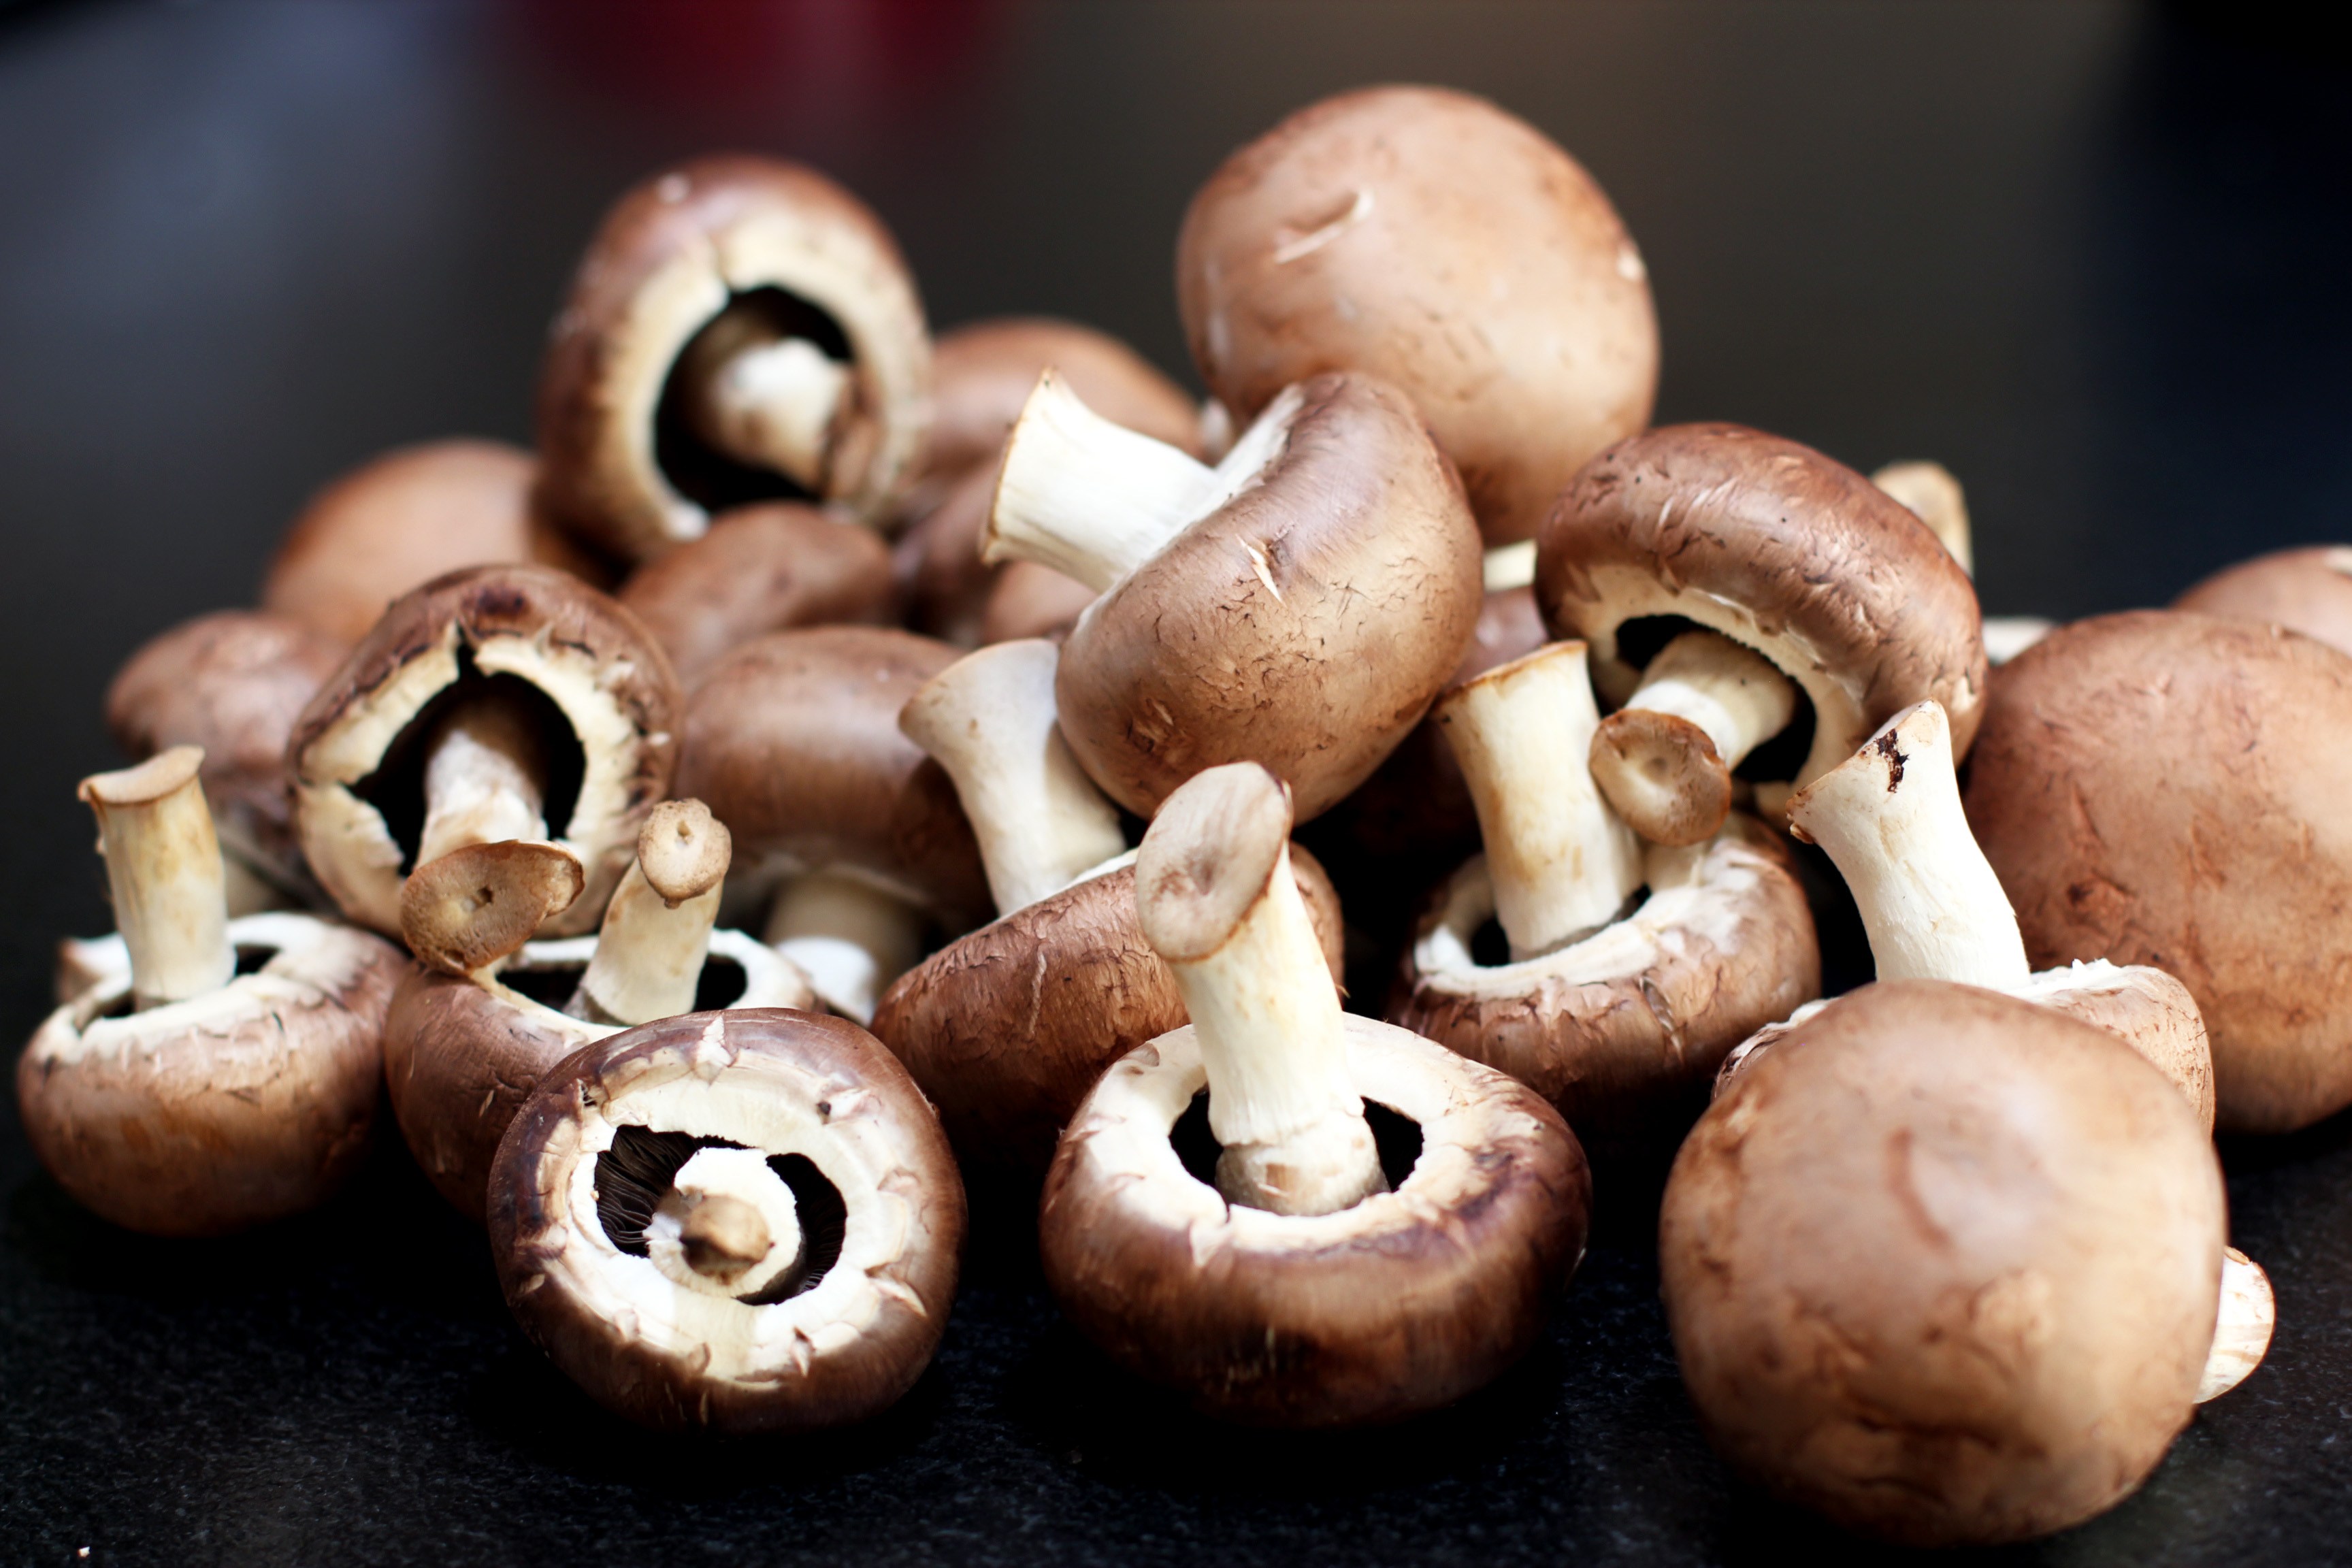 11 interesting facts about Mushrooms! - Top Food Facts